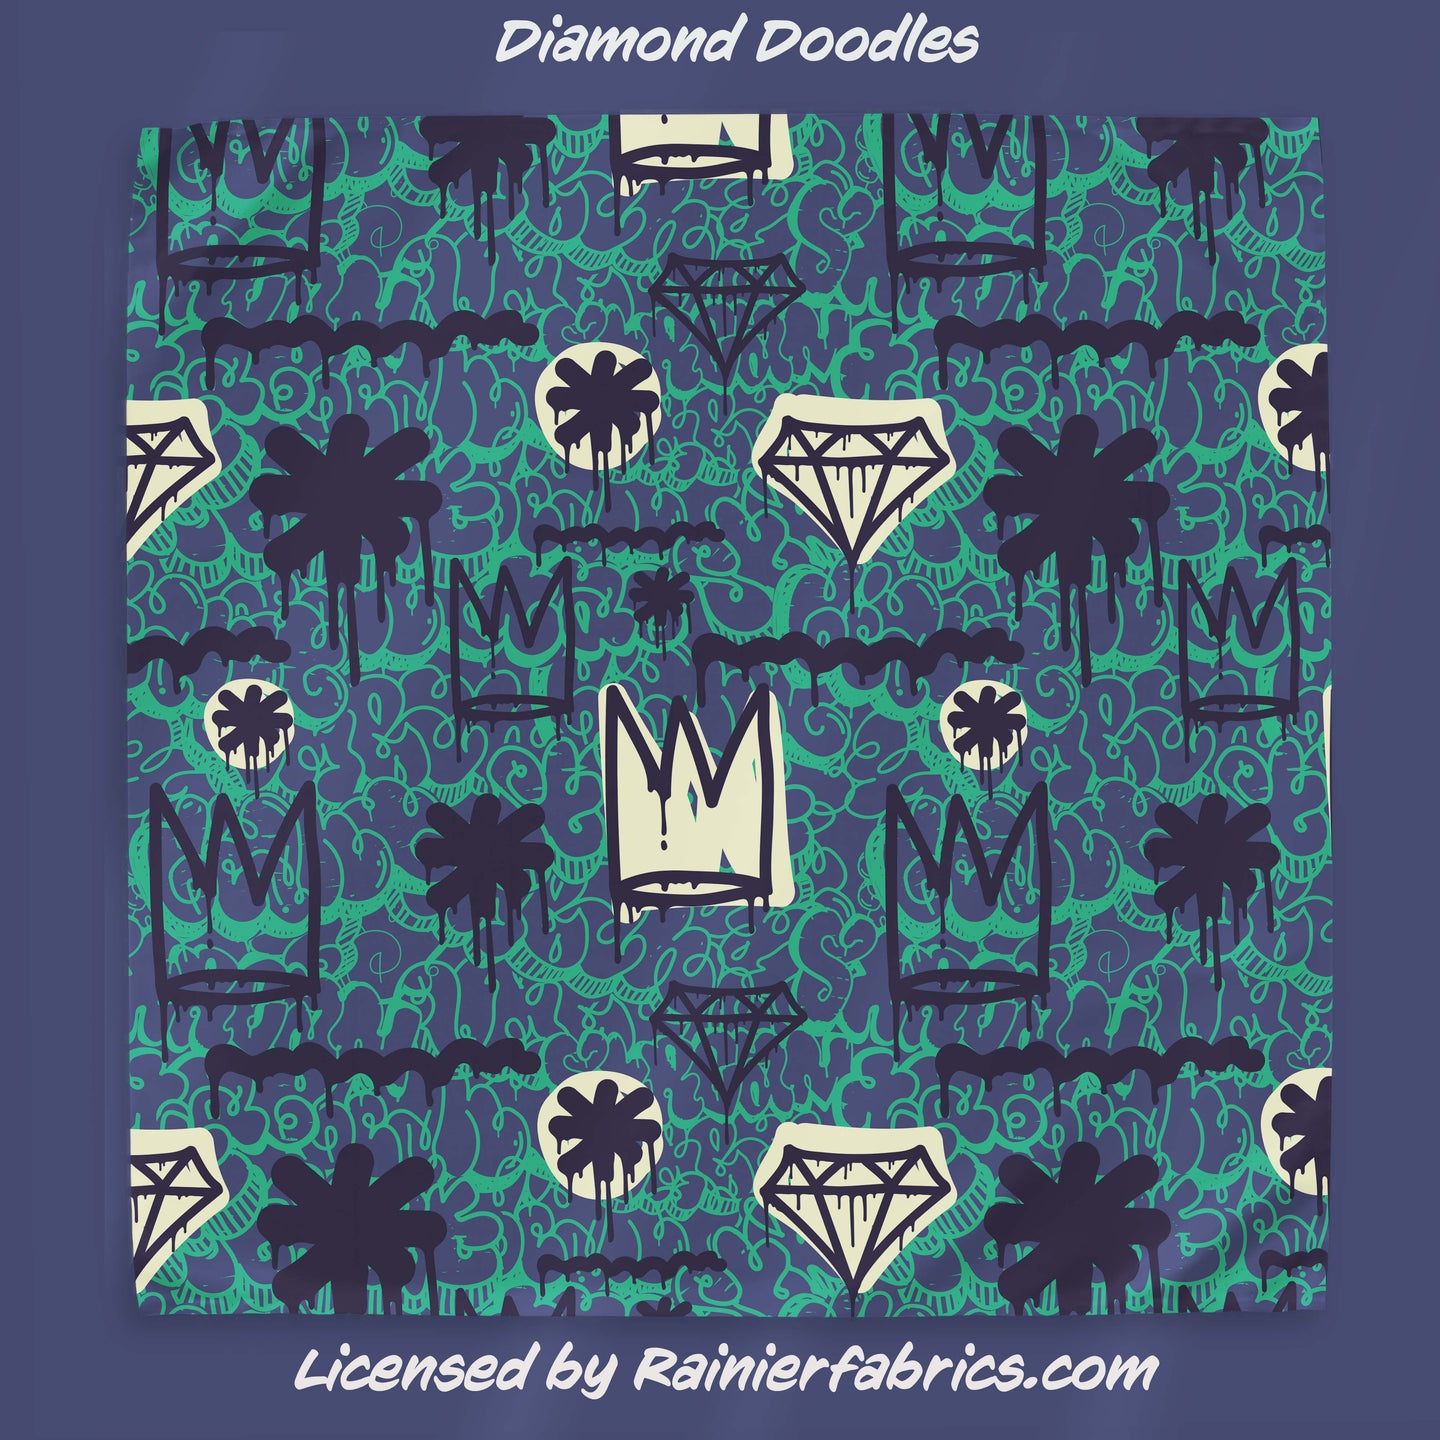 Diamond Doodles - 2-5 day TAT - Order by 1/2 yard; Blankets and towels available too